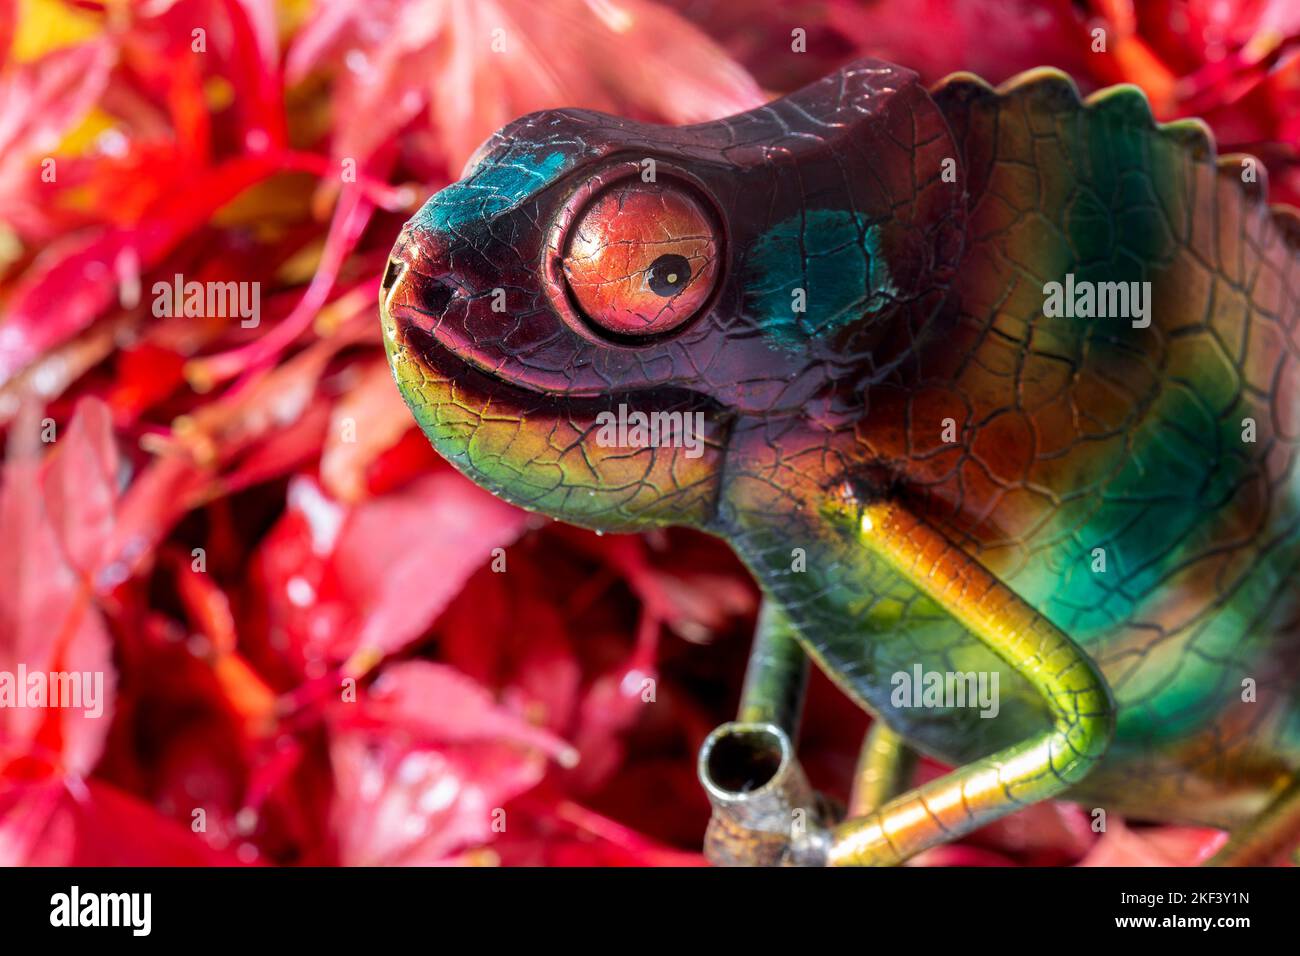 Chameleon colourful metallic garden ornament with autumn fall leaves in the background Stock Photo